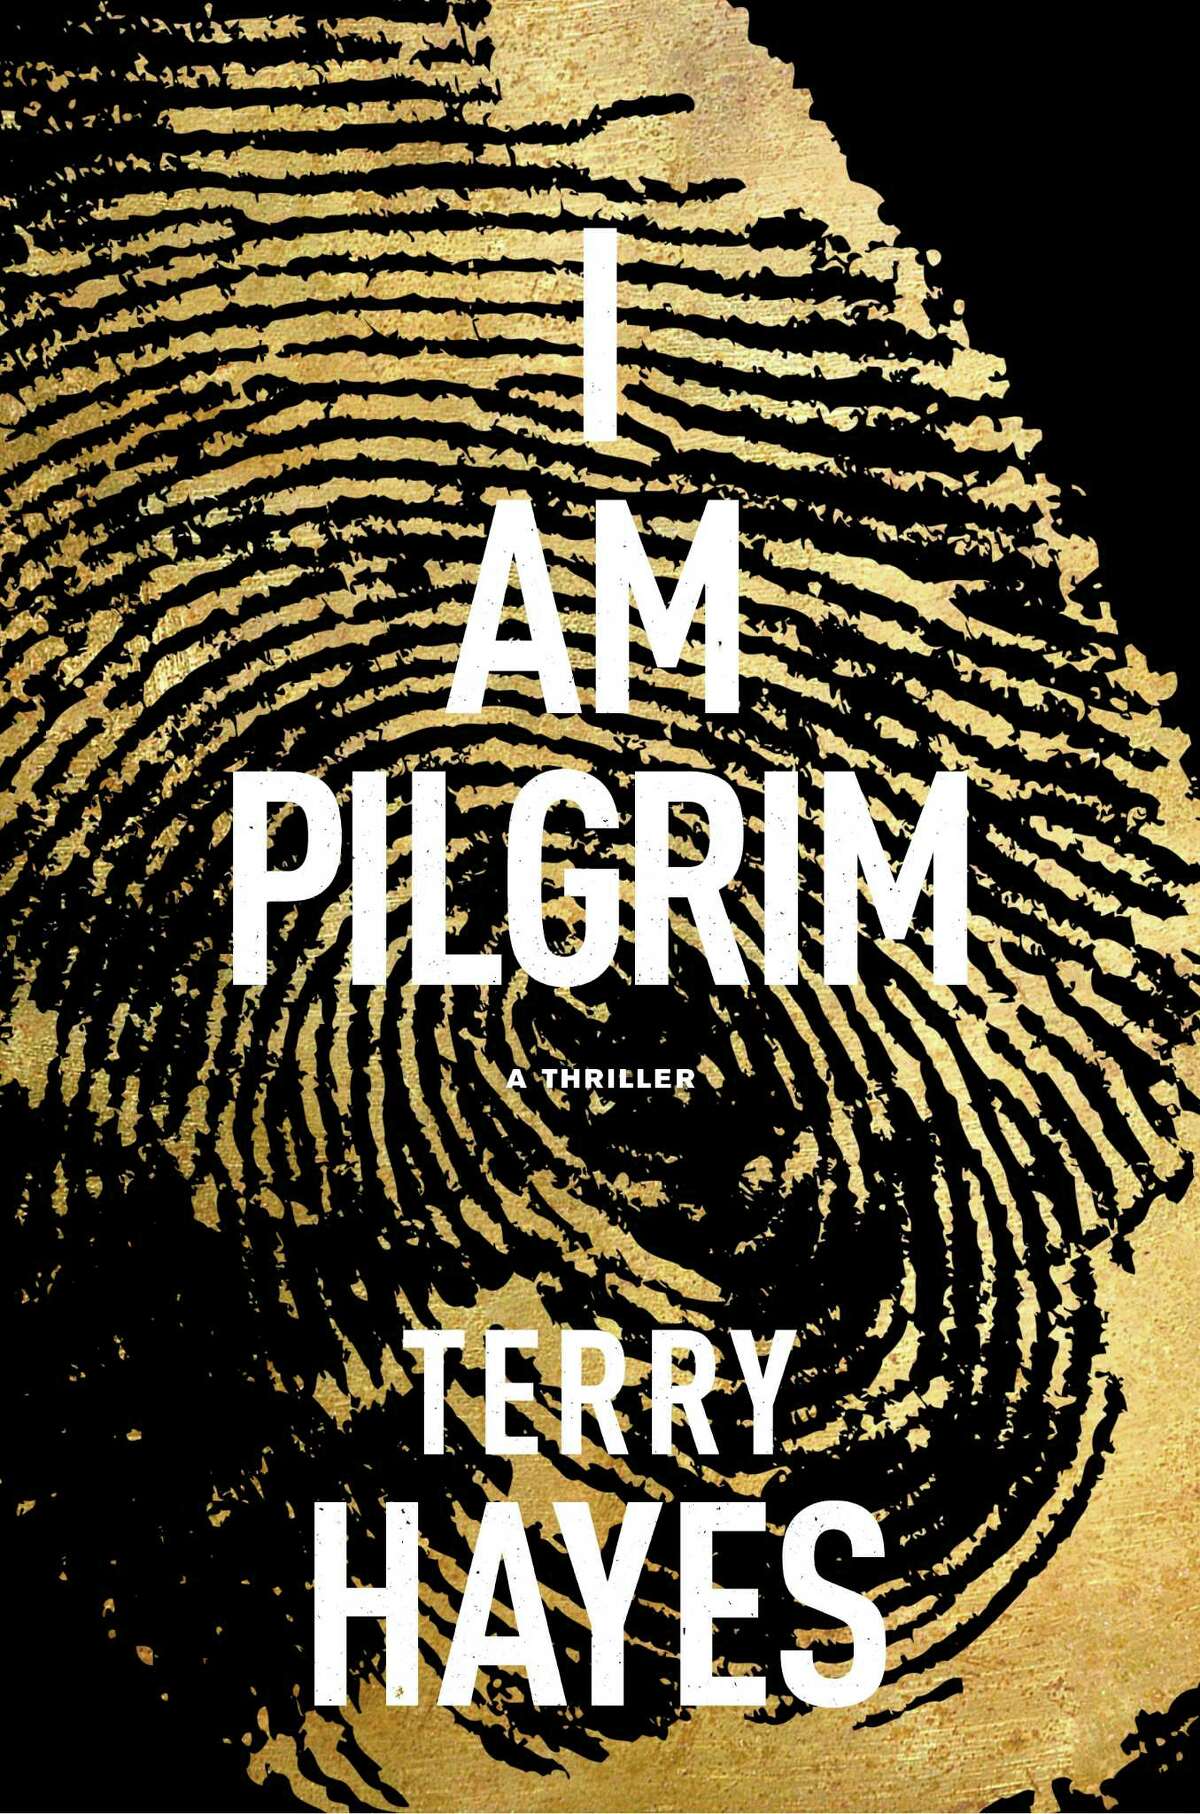 After writing screenplays for a number of Australian films, including "Dead Calm," Terry Hayes is making his debut as a novelist with "I Am Pilgrim," a thriller the author will talk about at an "Inspired Writers" session at Fairfield University on Wednesday, May 28.